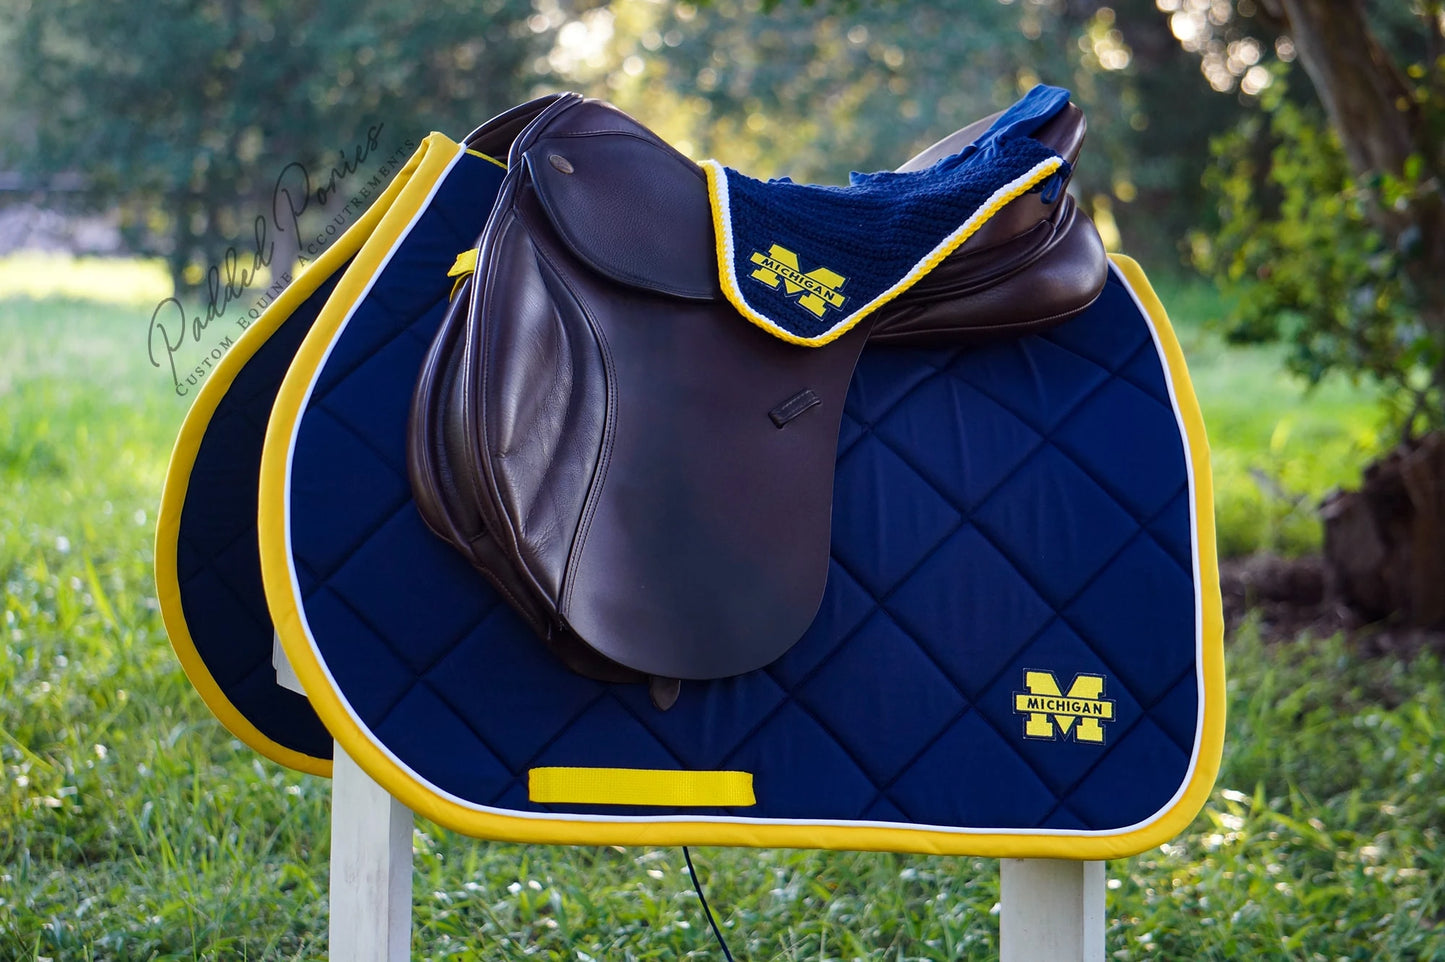 Navy Blue and Yellow University of Michigan Patch Fly Veil Bonnet with Matching Saddle Pad